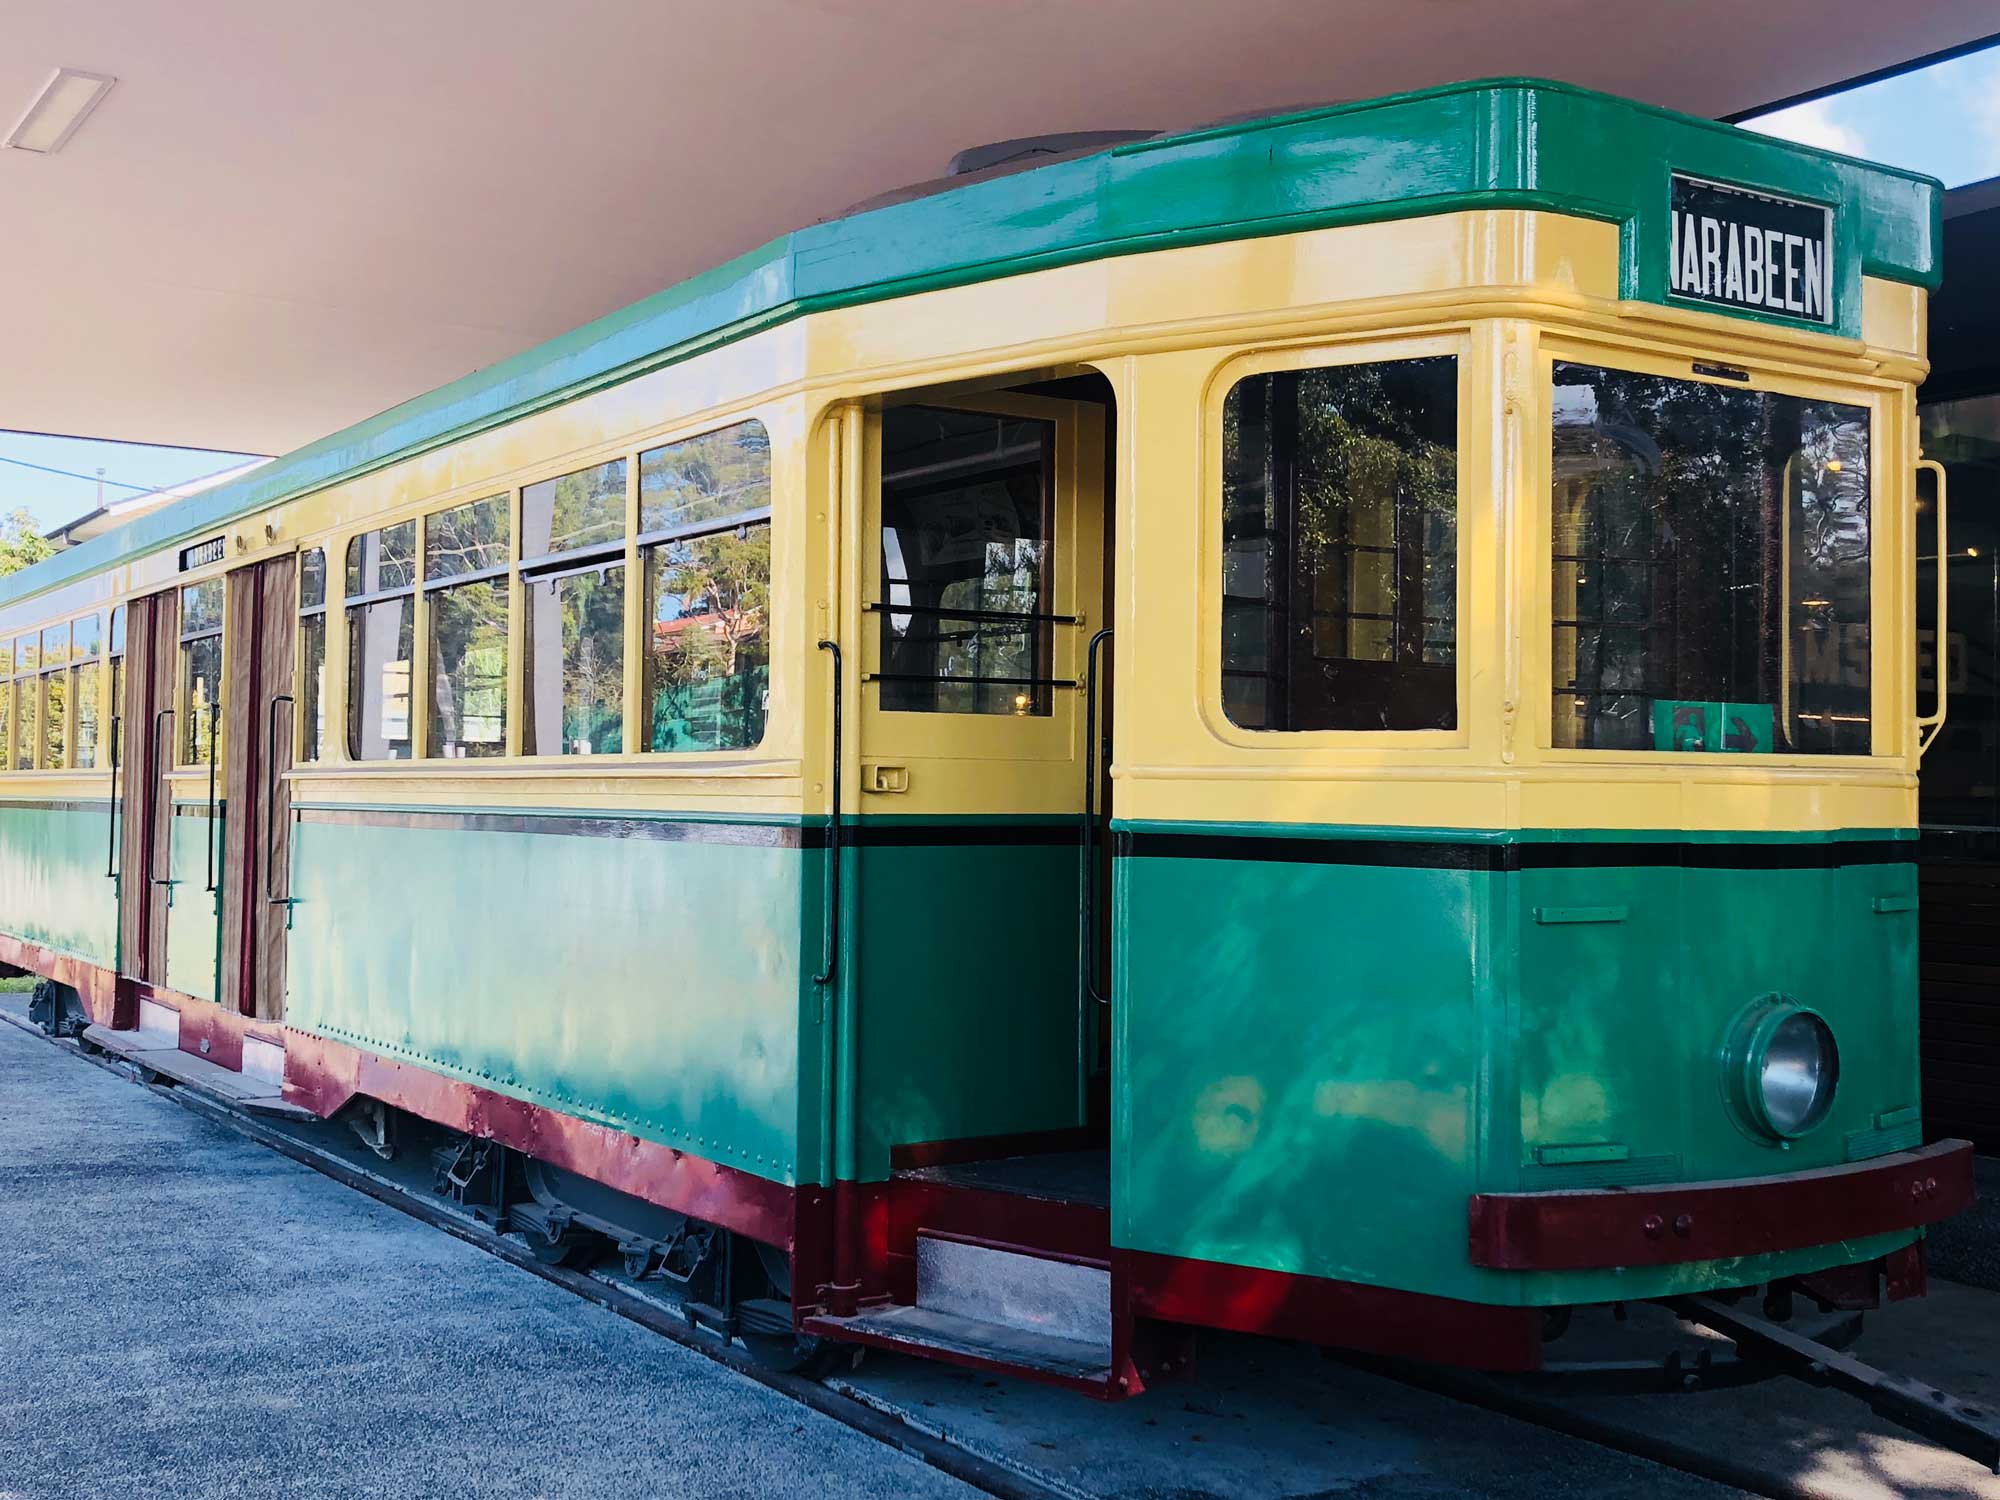 Restored Vintage Tram ‘Number 1753’ and Café Set to Open This Month